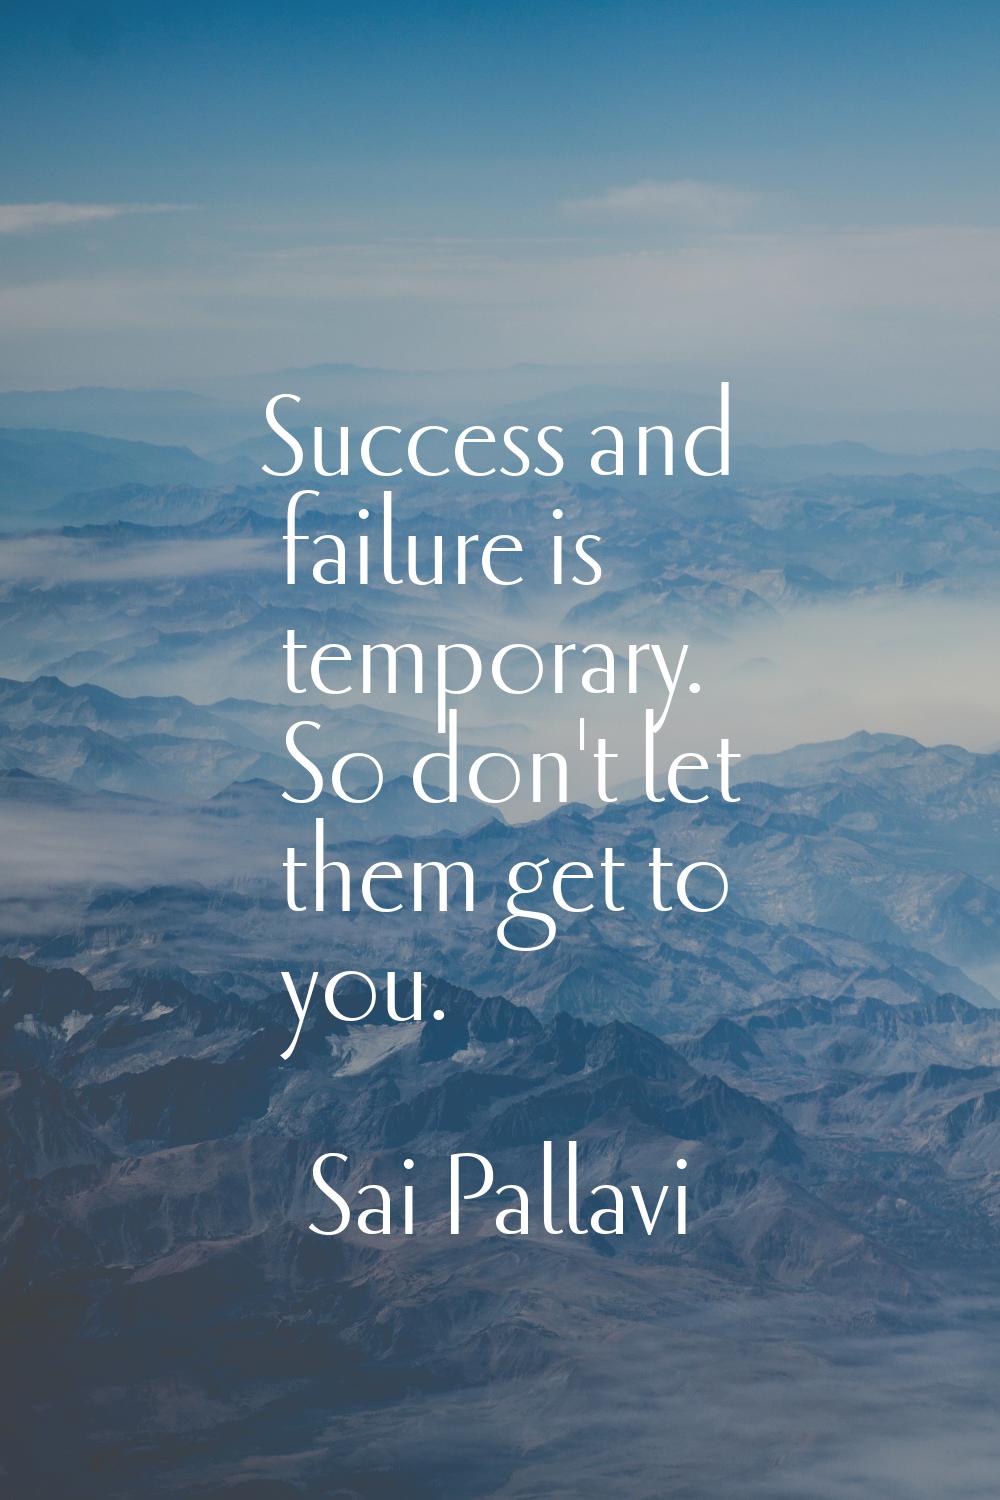 Success and failure is temporary. So don't let them get to you.